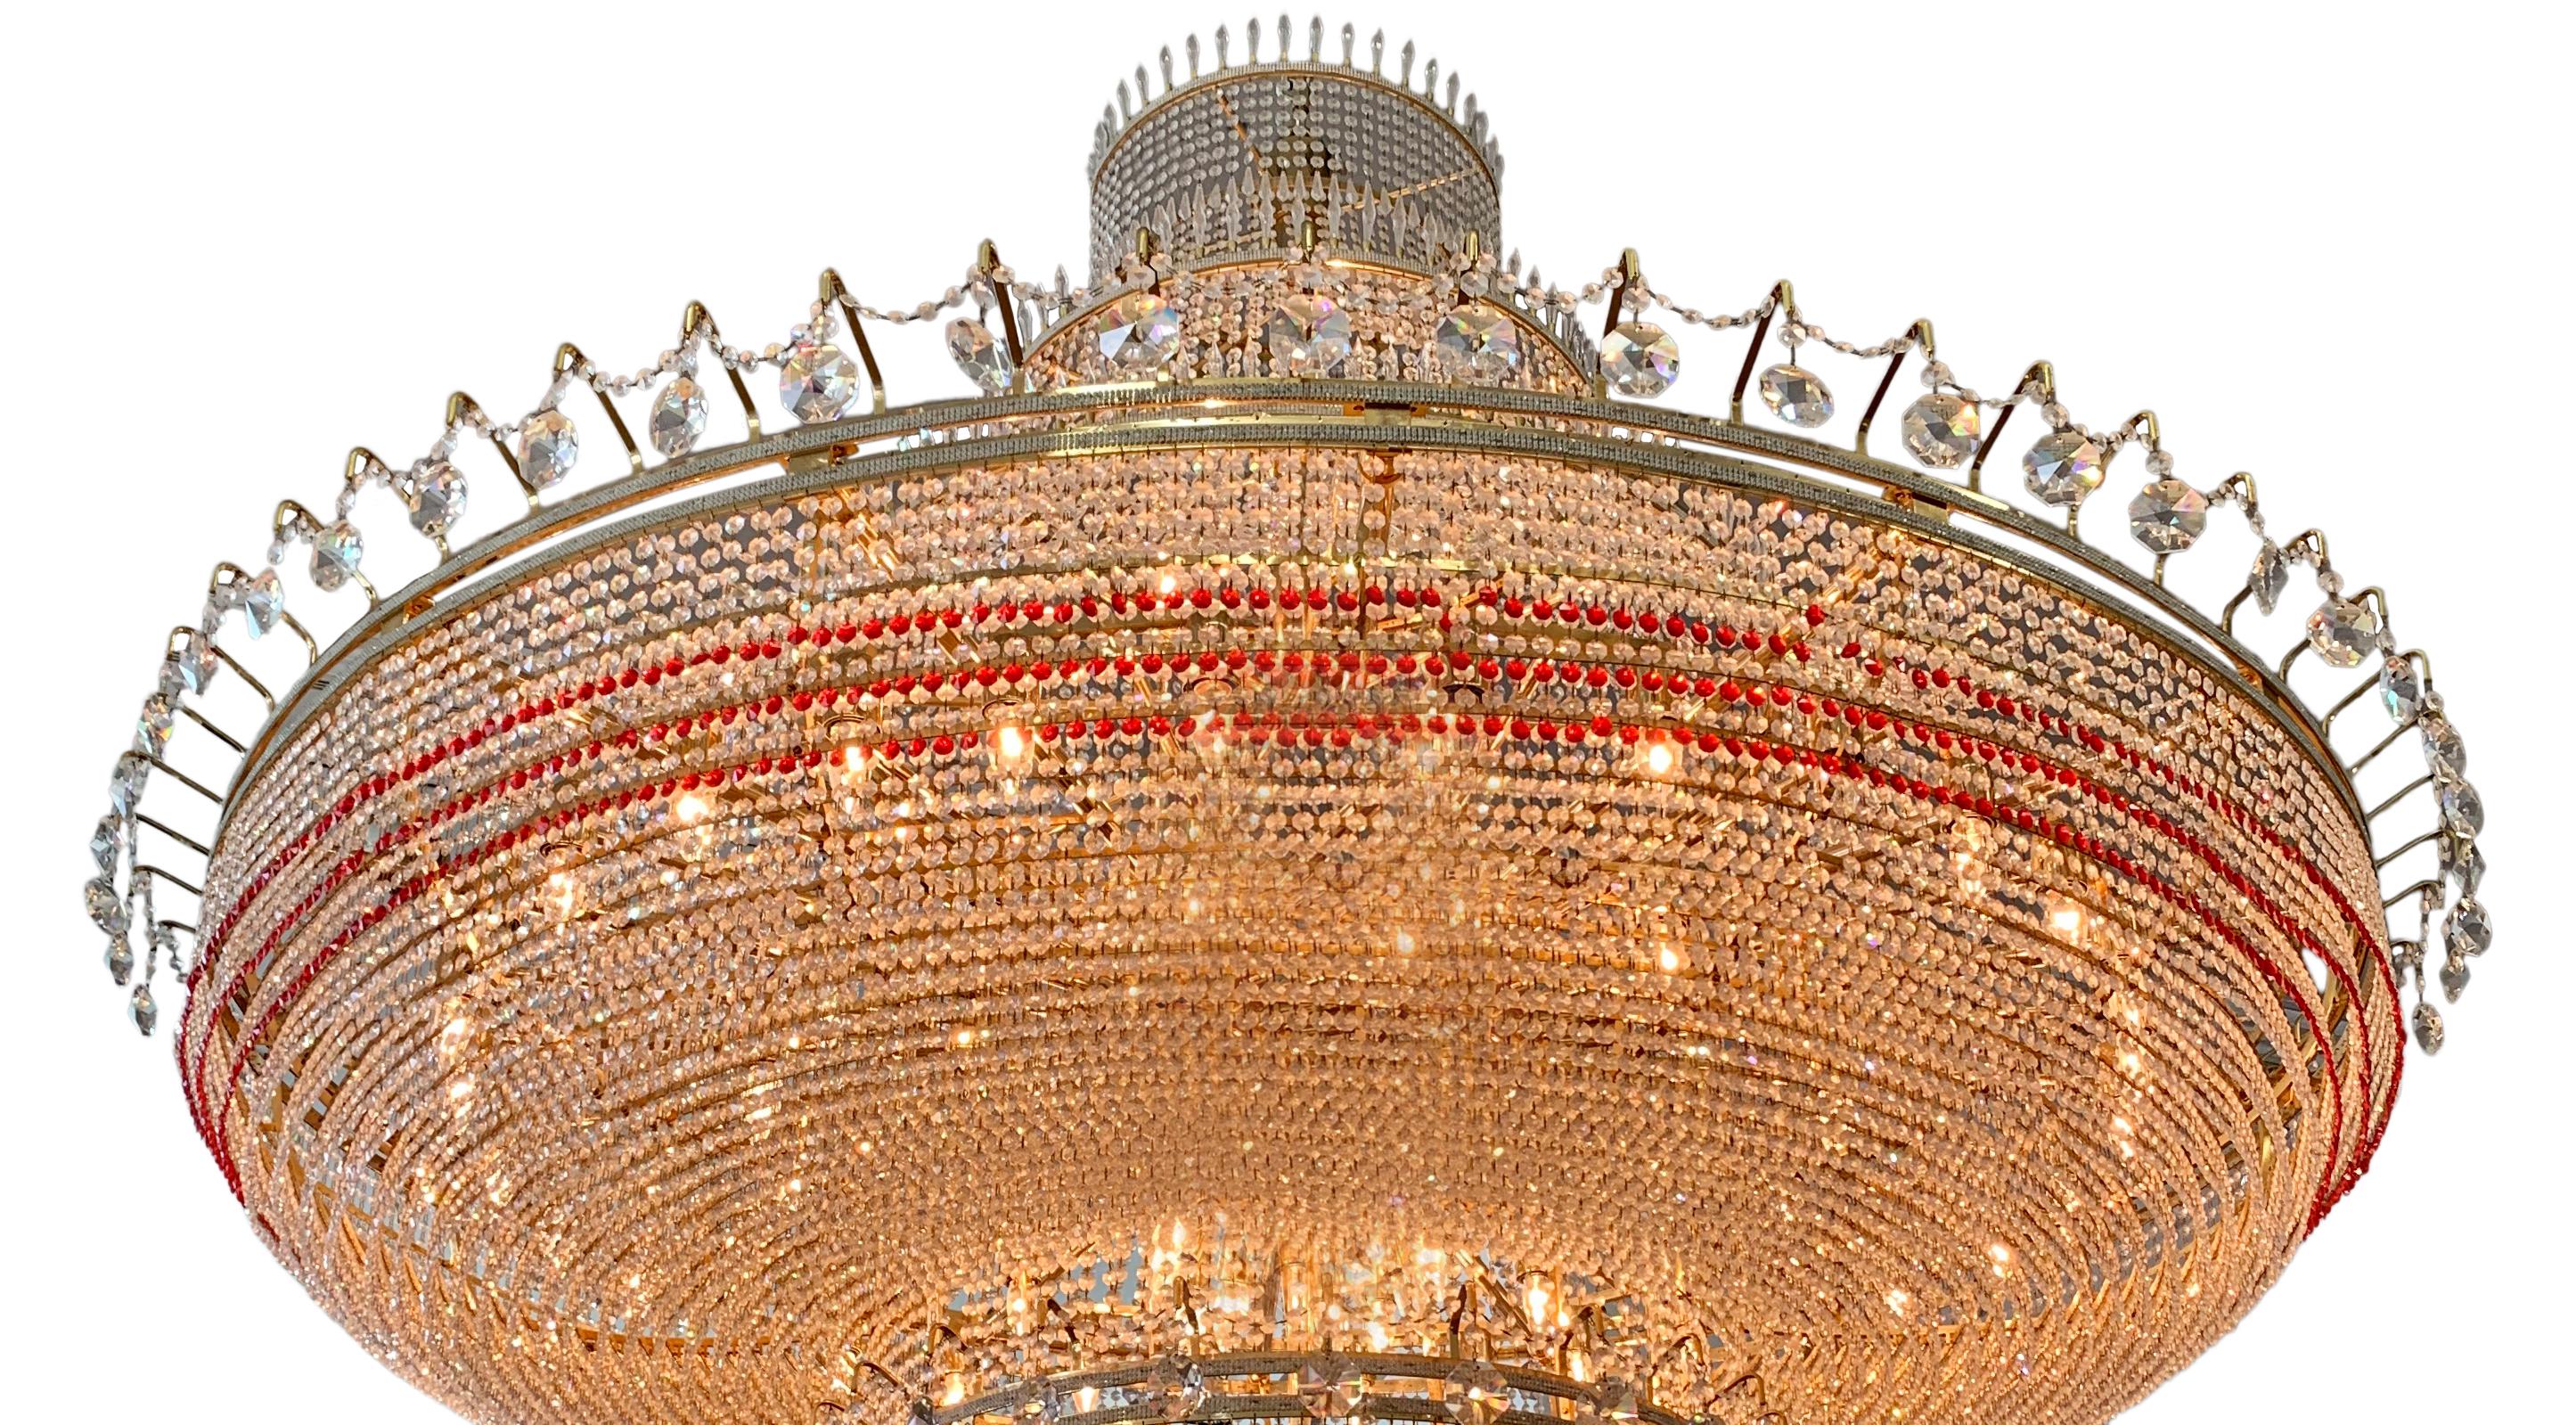 This magnificent continental palace-size chandelier, with 7 x 7 feet dimensions, is decorated with clear and red cut crystals mounted with gilt bronze. A beautiful neo-classical  chandelier with a cone-shaped end where most of the red cut crystals